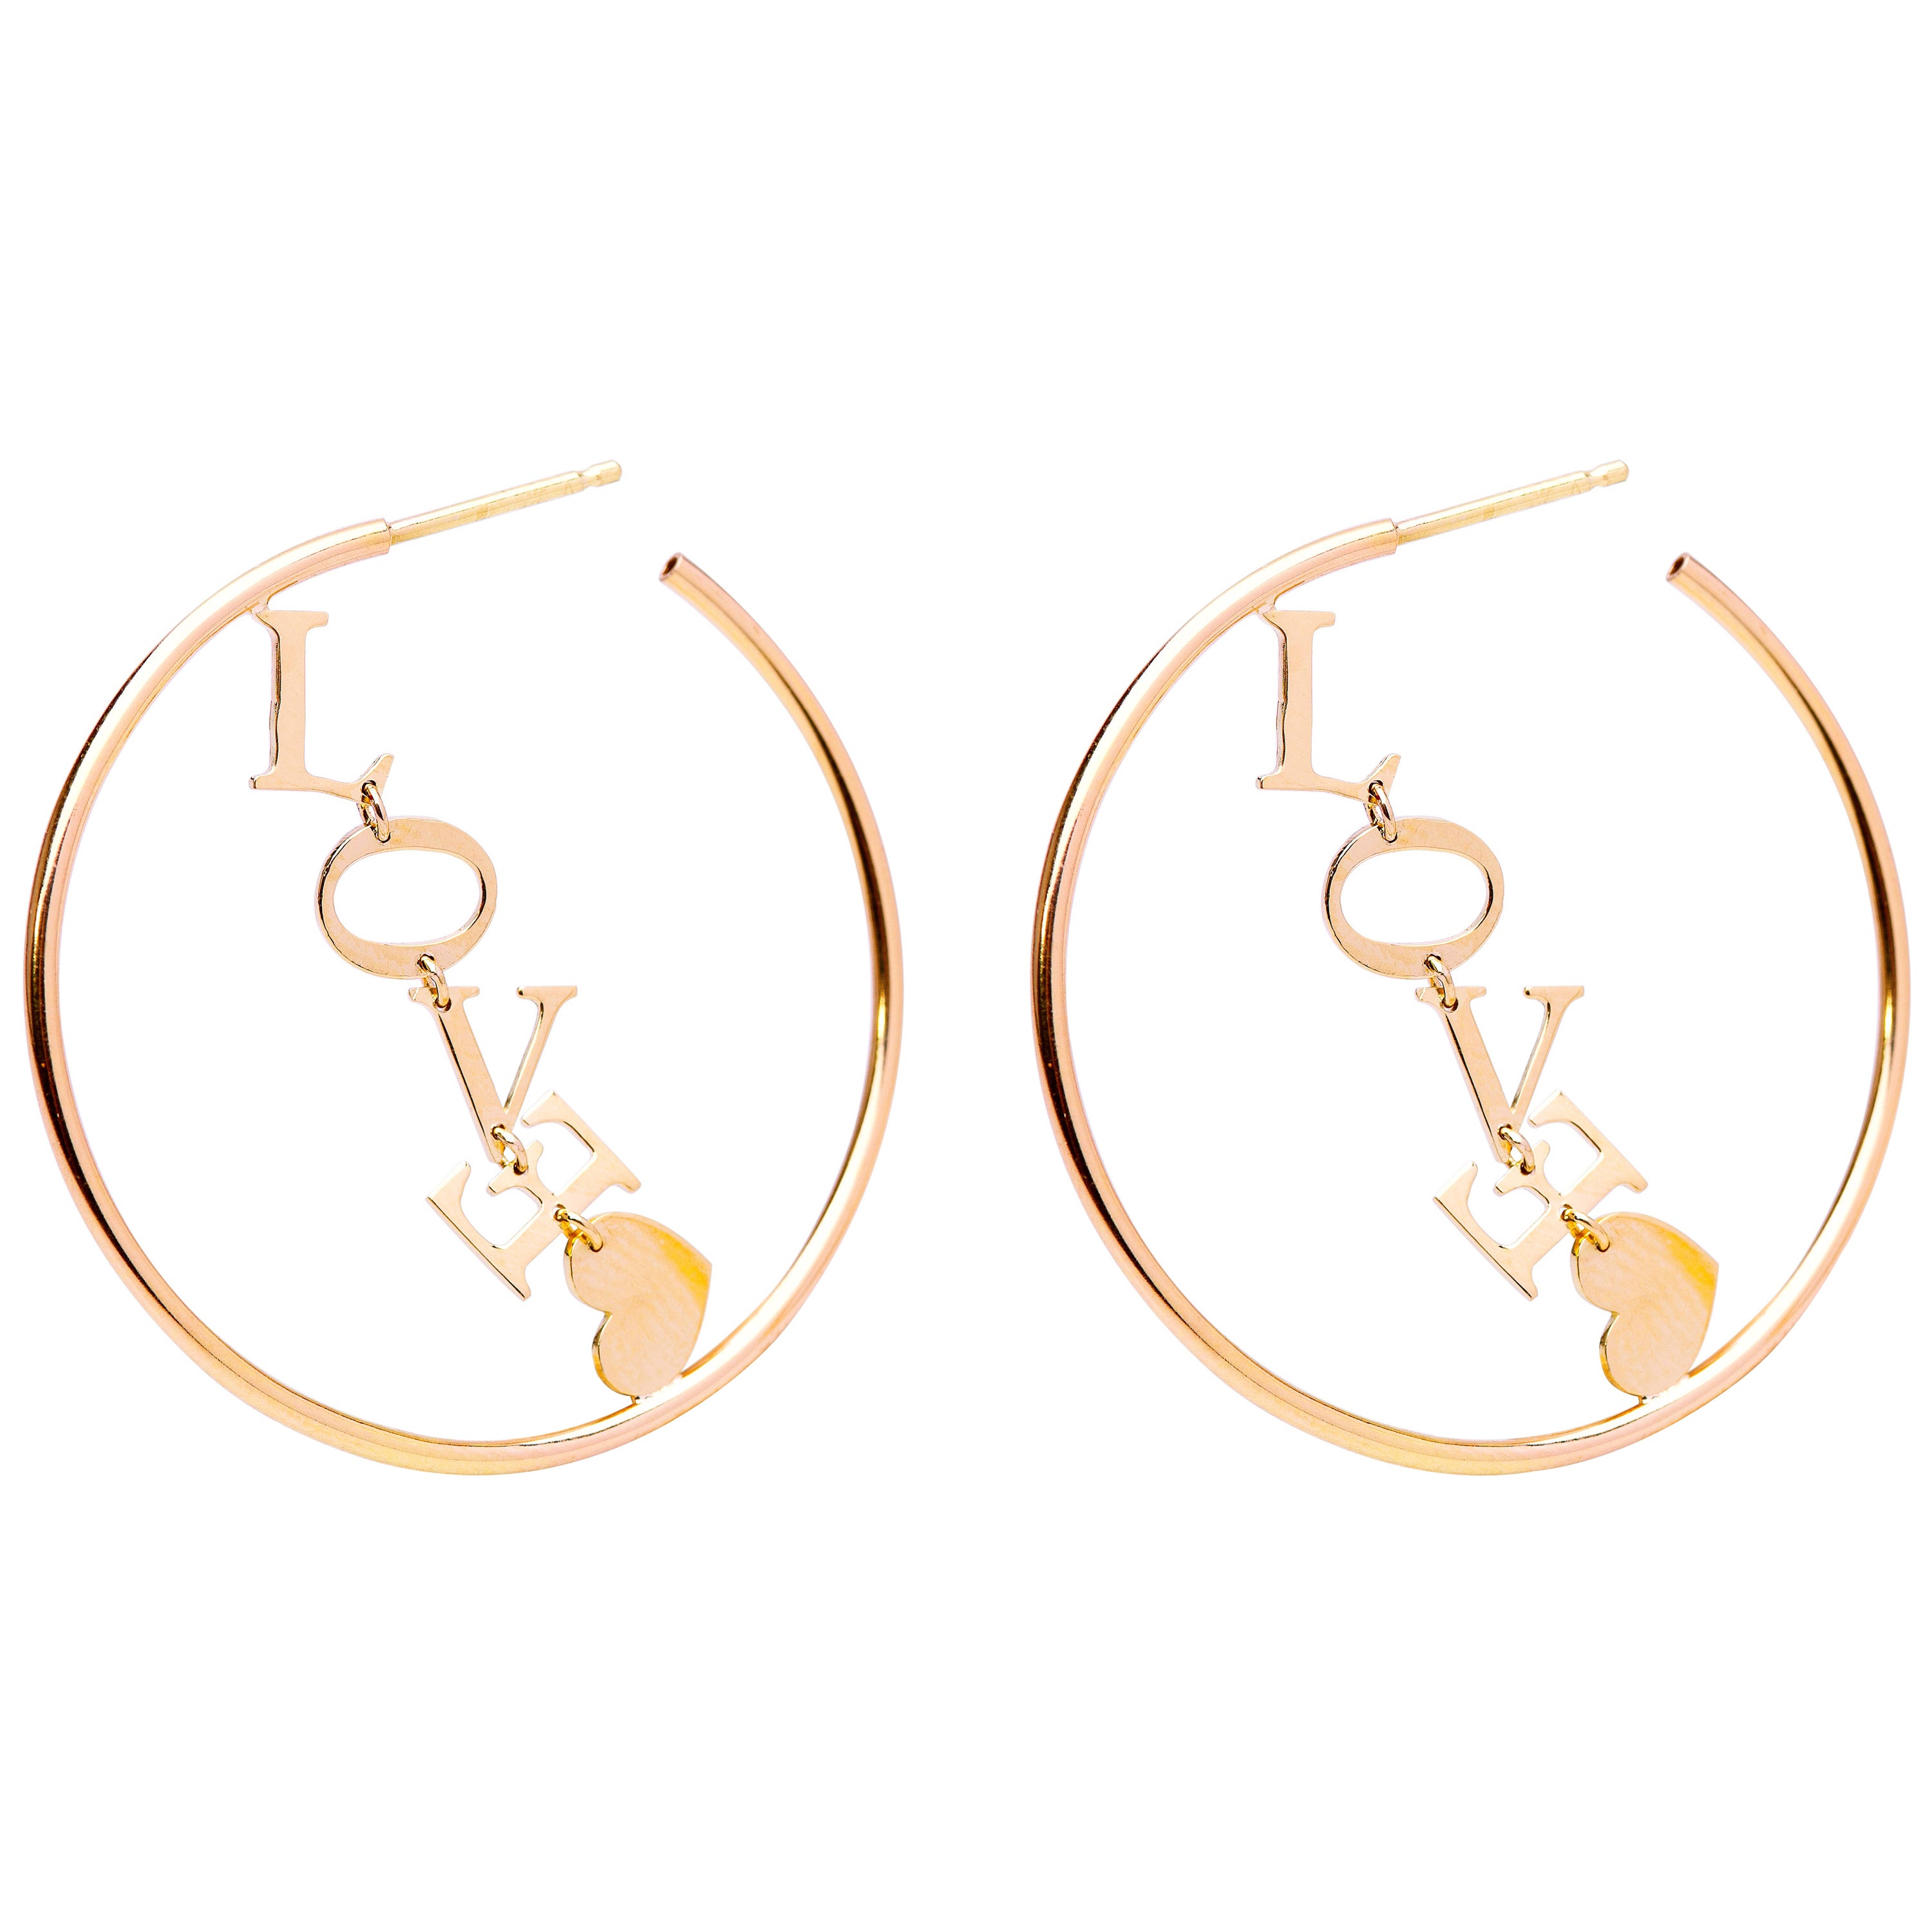 Love 18K Yellow Gold Letters Circle Hoops Handcrafted Design Earrings For Sale